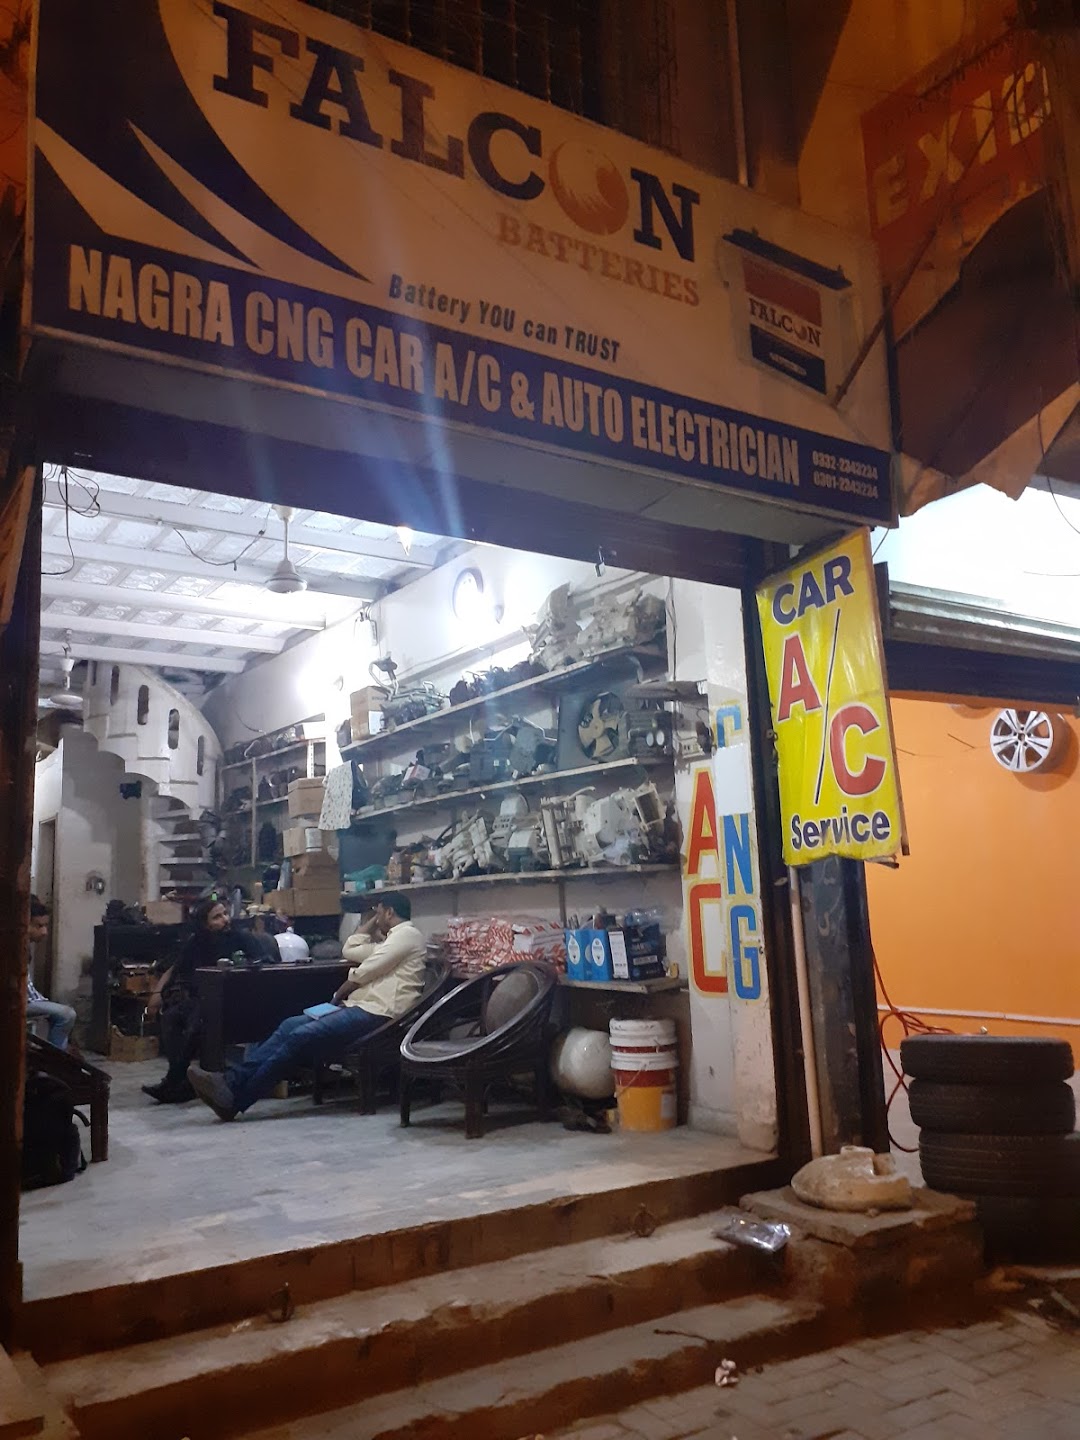 NAGRA car air condition and cng service